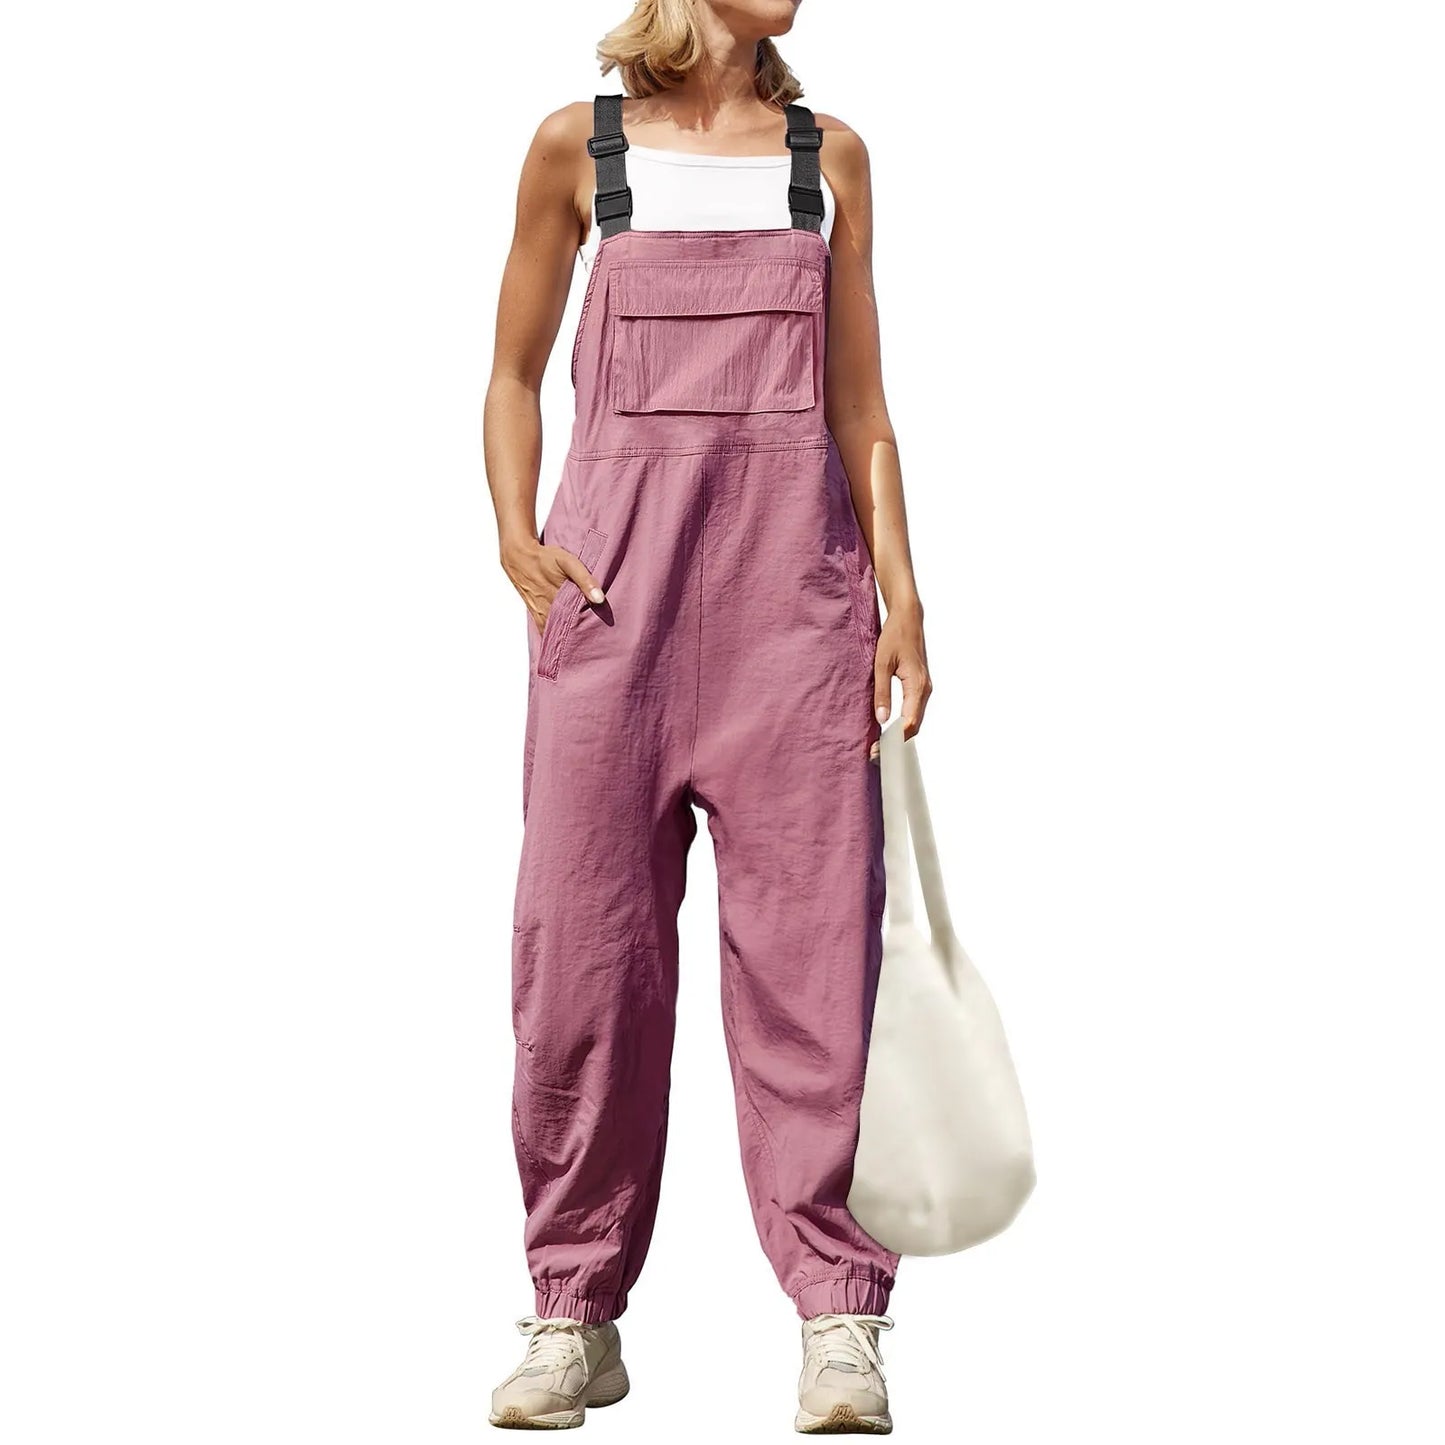 Jumpsuits- Women's Solid Bib Pencil Pantsuits with Multipockets - Baggy Overalls- Pink- Chuzko Women Clothing